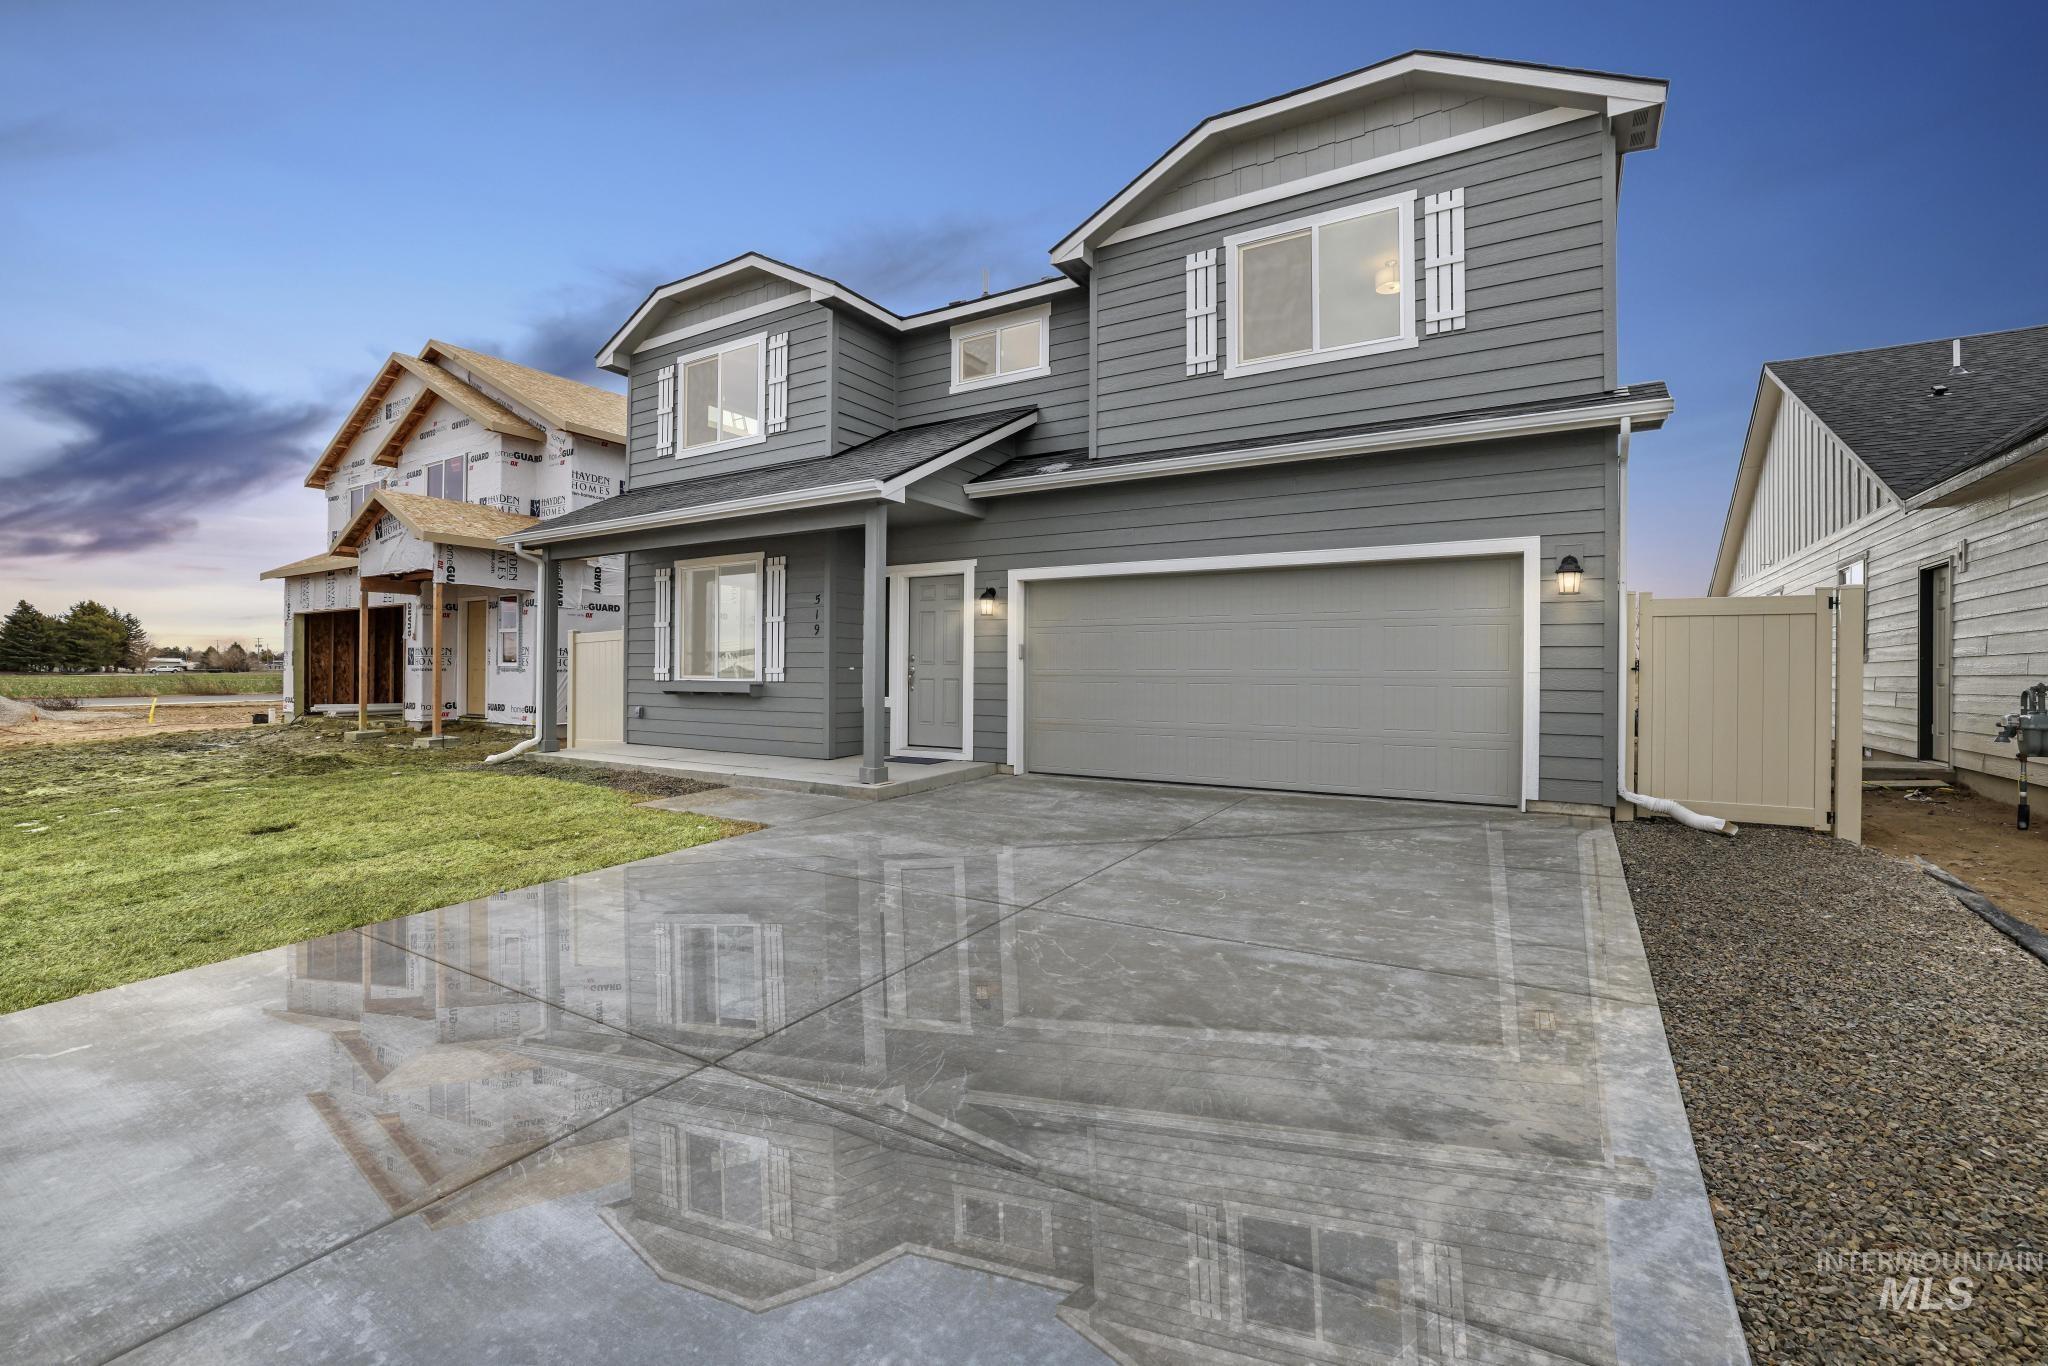 519 Upland Ave., Twin Falls, Idaho 83301, 4 Bedrooms, 2.5 Bathrooms, Residential For Sale, Price $419,990,MLS 98909575